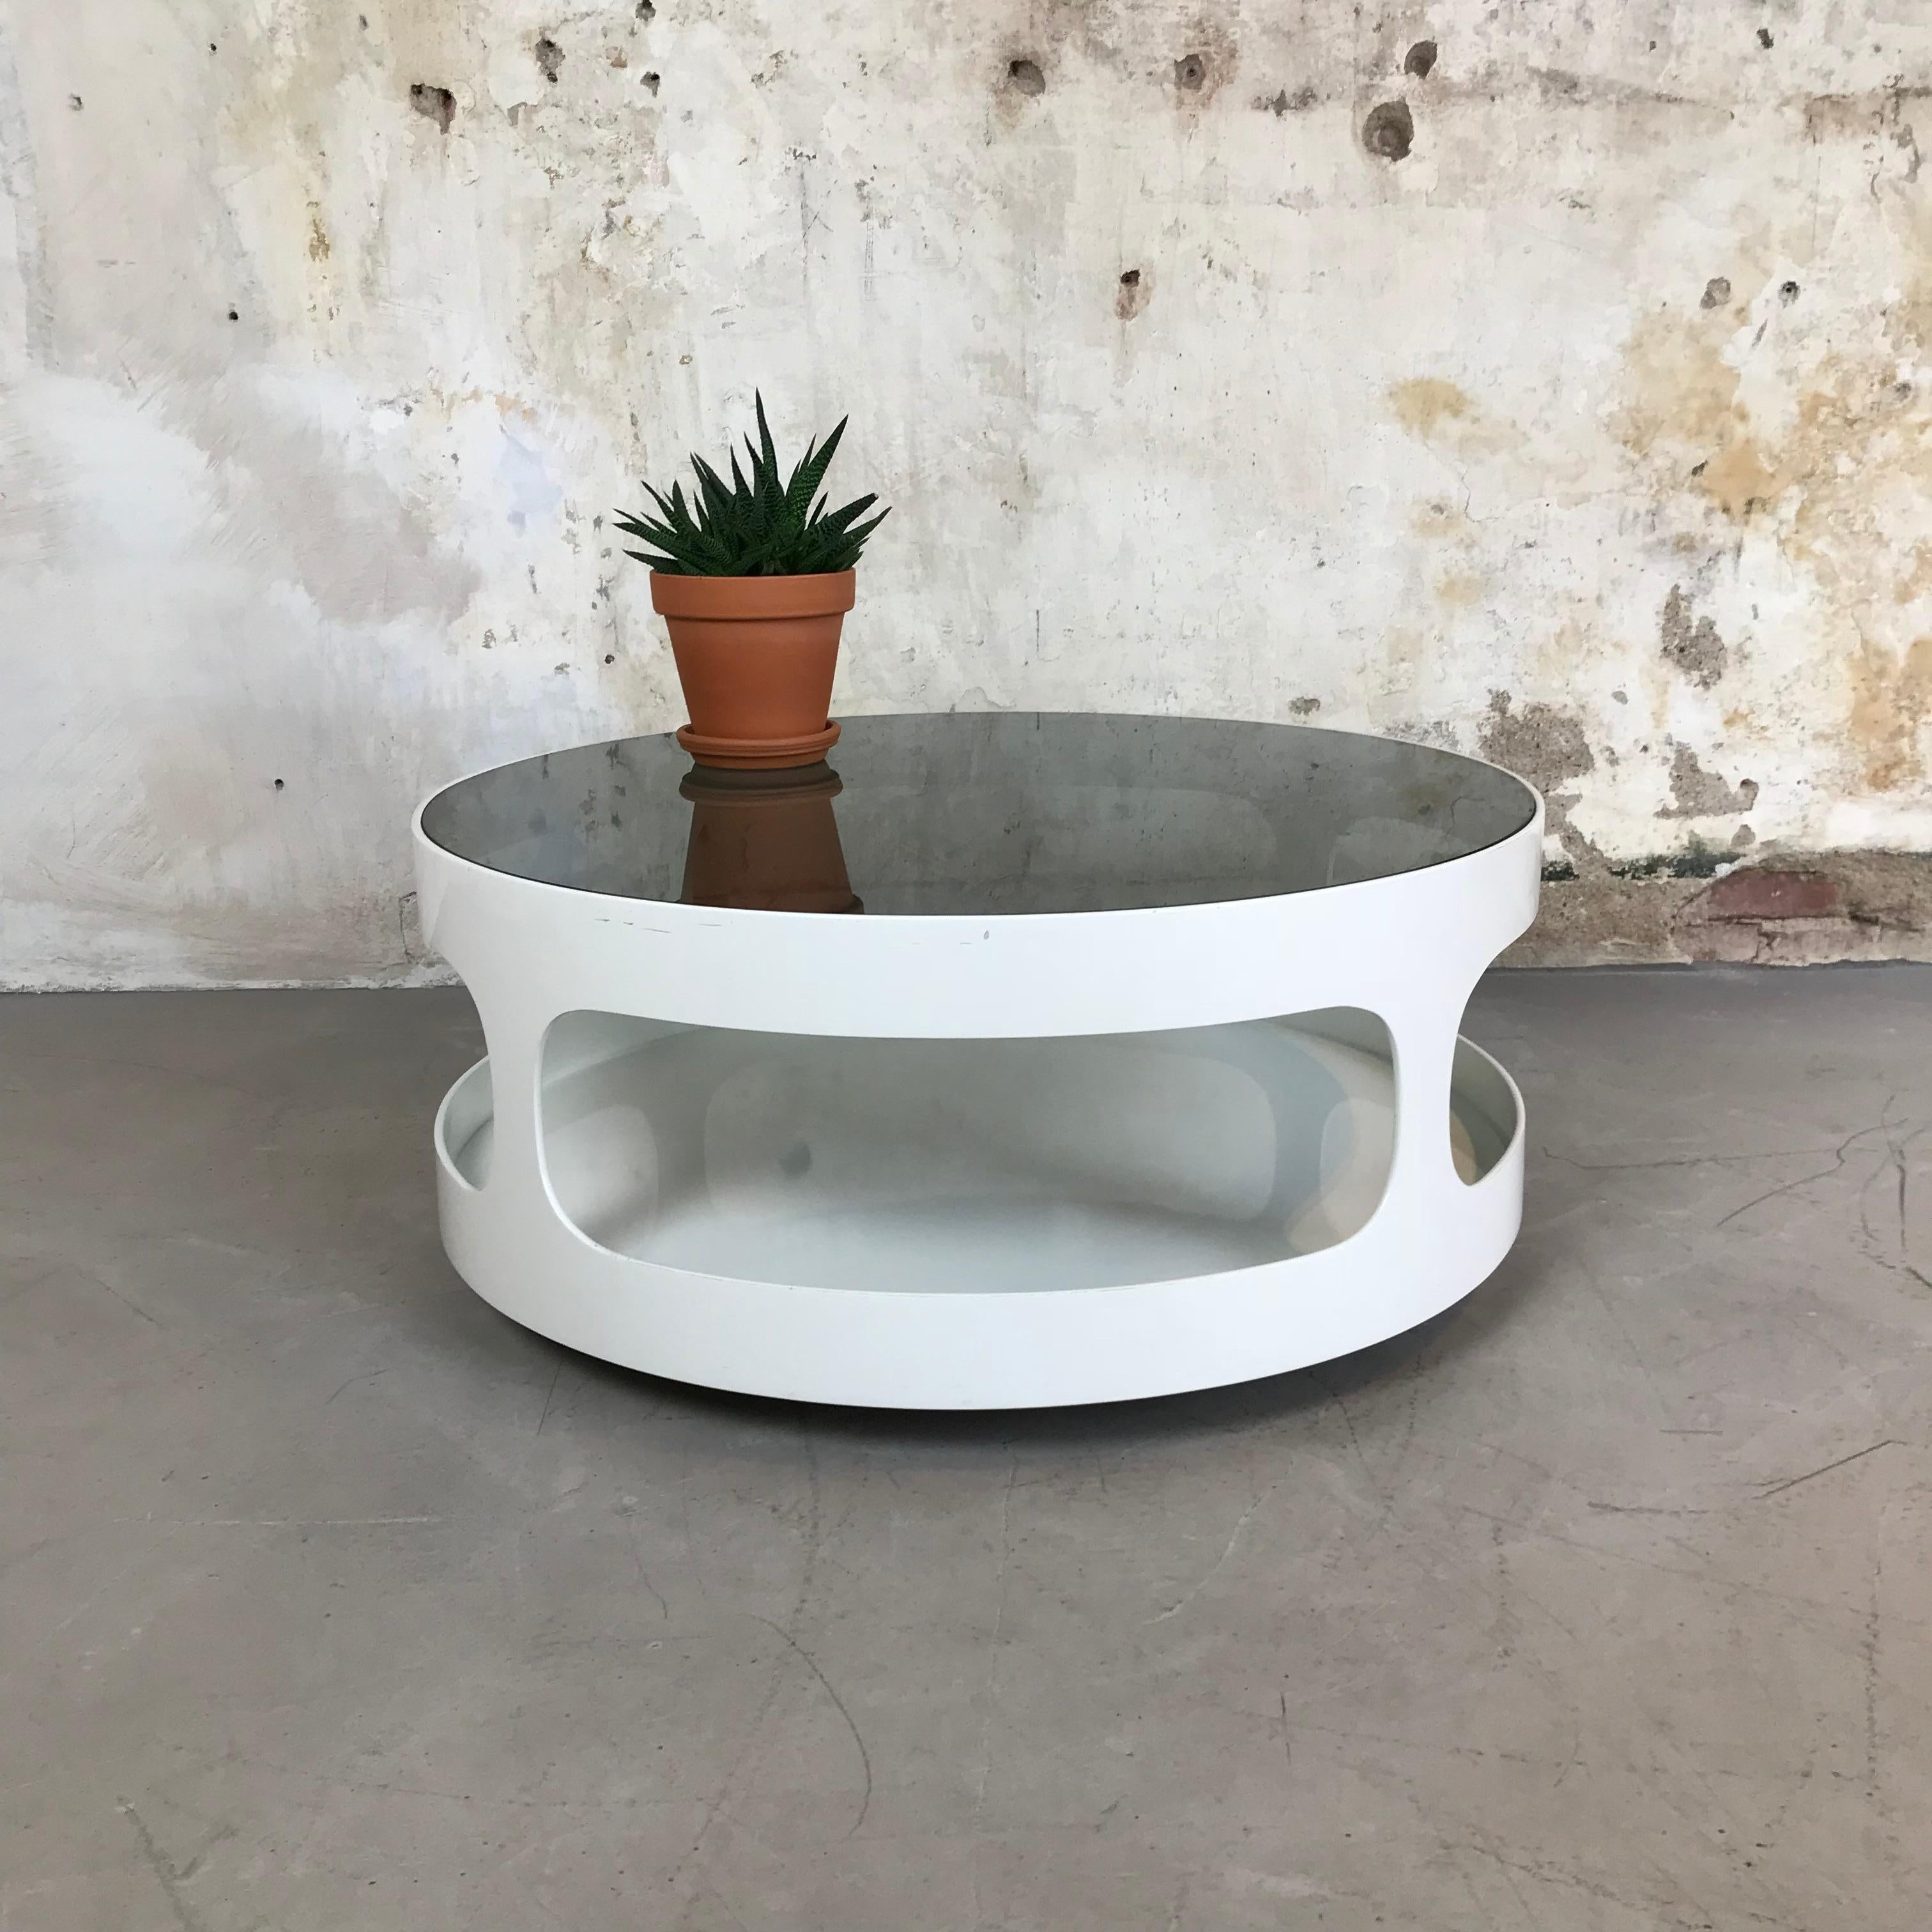 If you are looking for a stylish designer’s coffee table with a space age look for your mid-century interior then this cool table could be perfect for you. It is designed by Erik van Buijtenen and produced by Nebu Holland, 1970s.

The white base